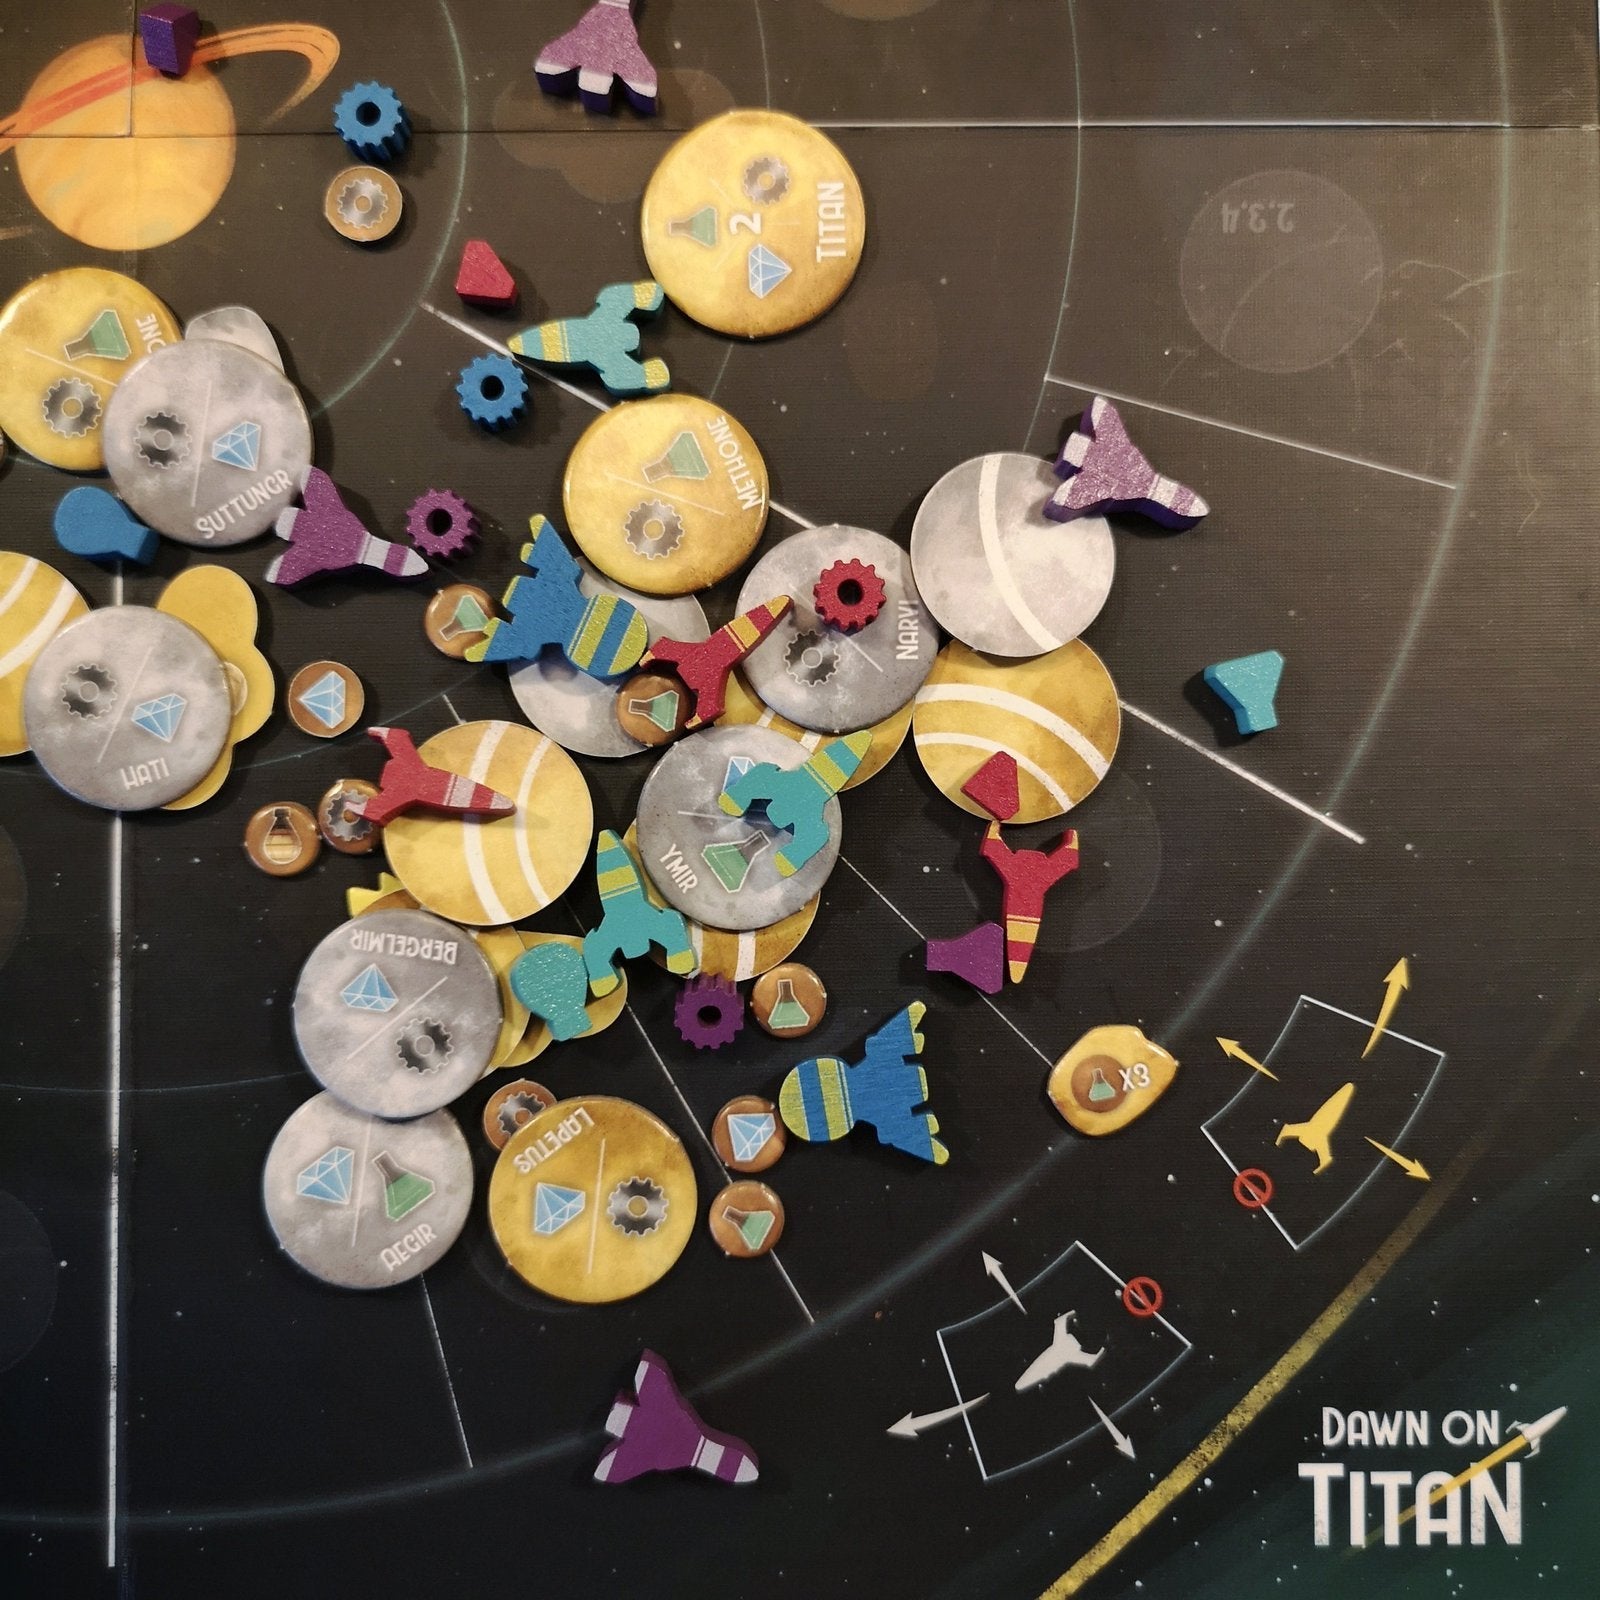 Dawn on Titan Board Game - all game pieces displayed in a pile on the board